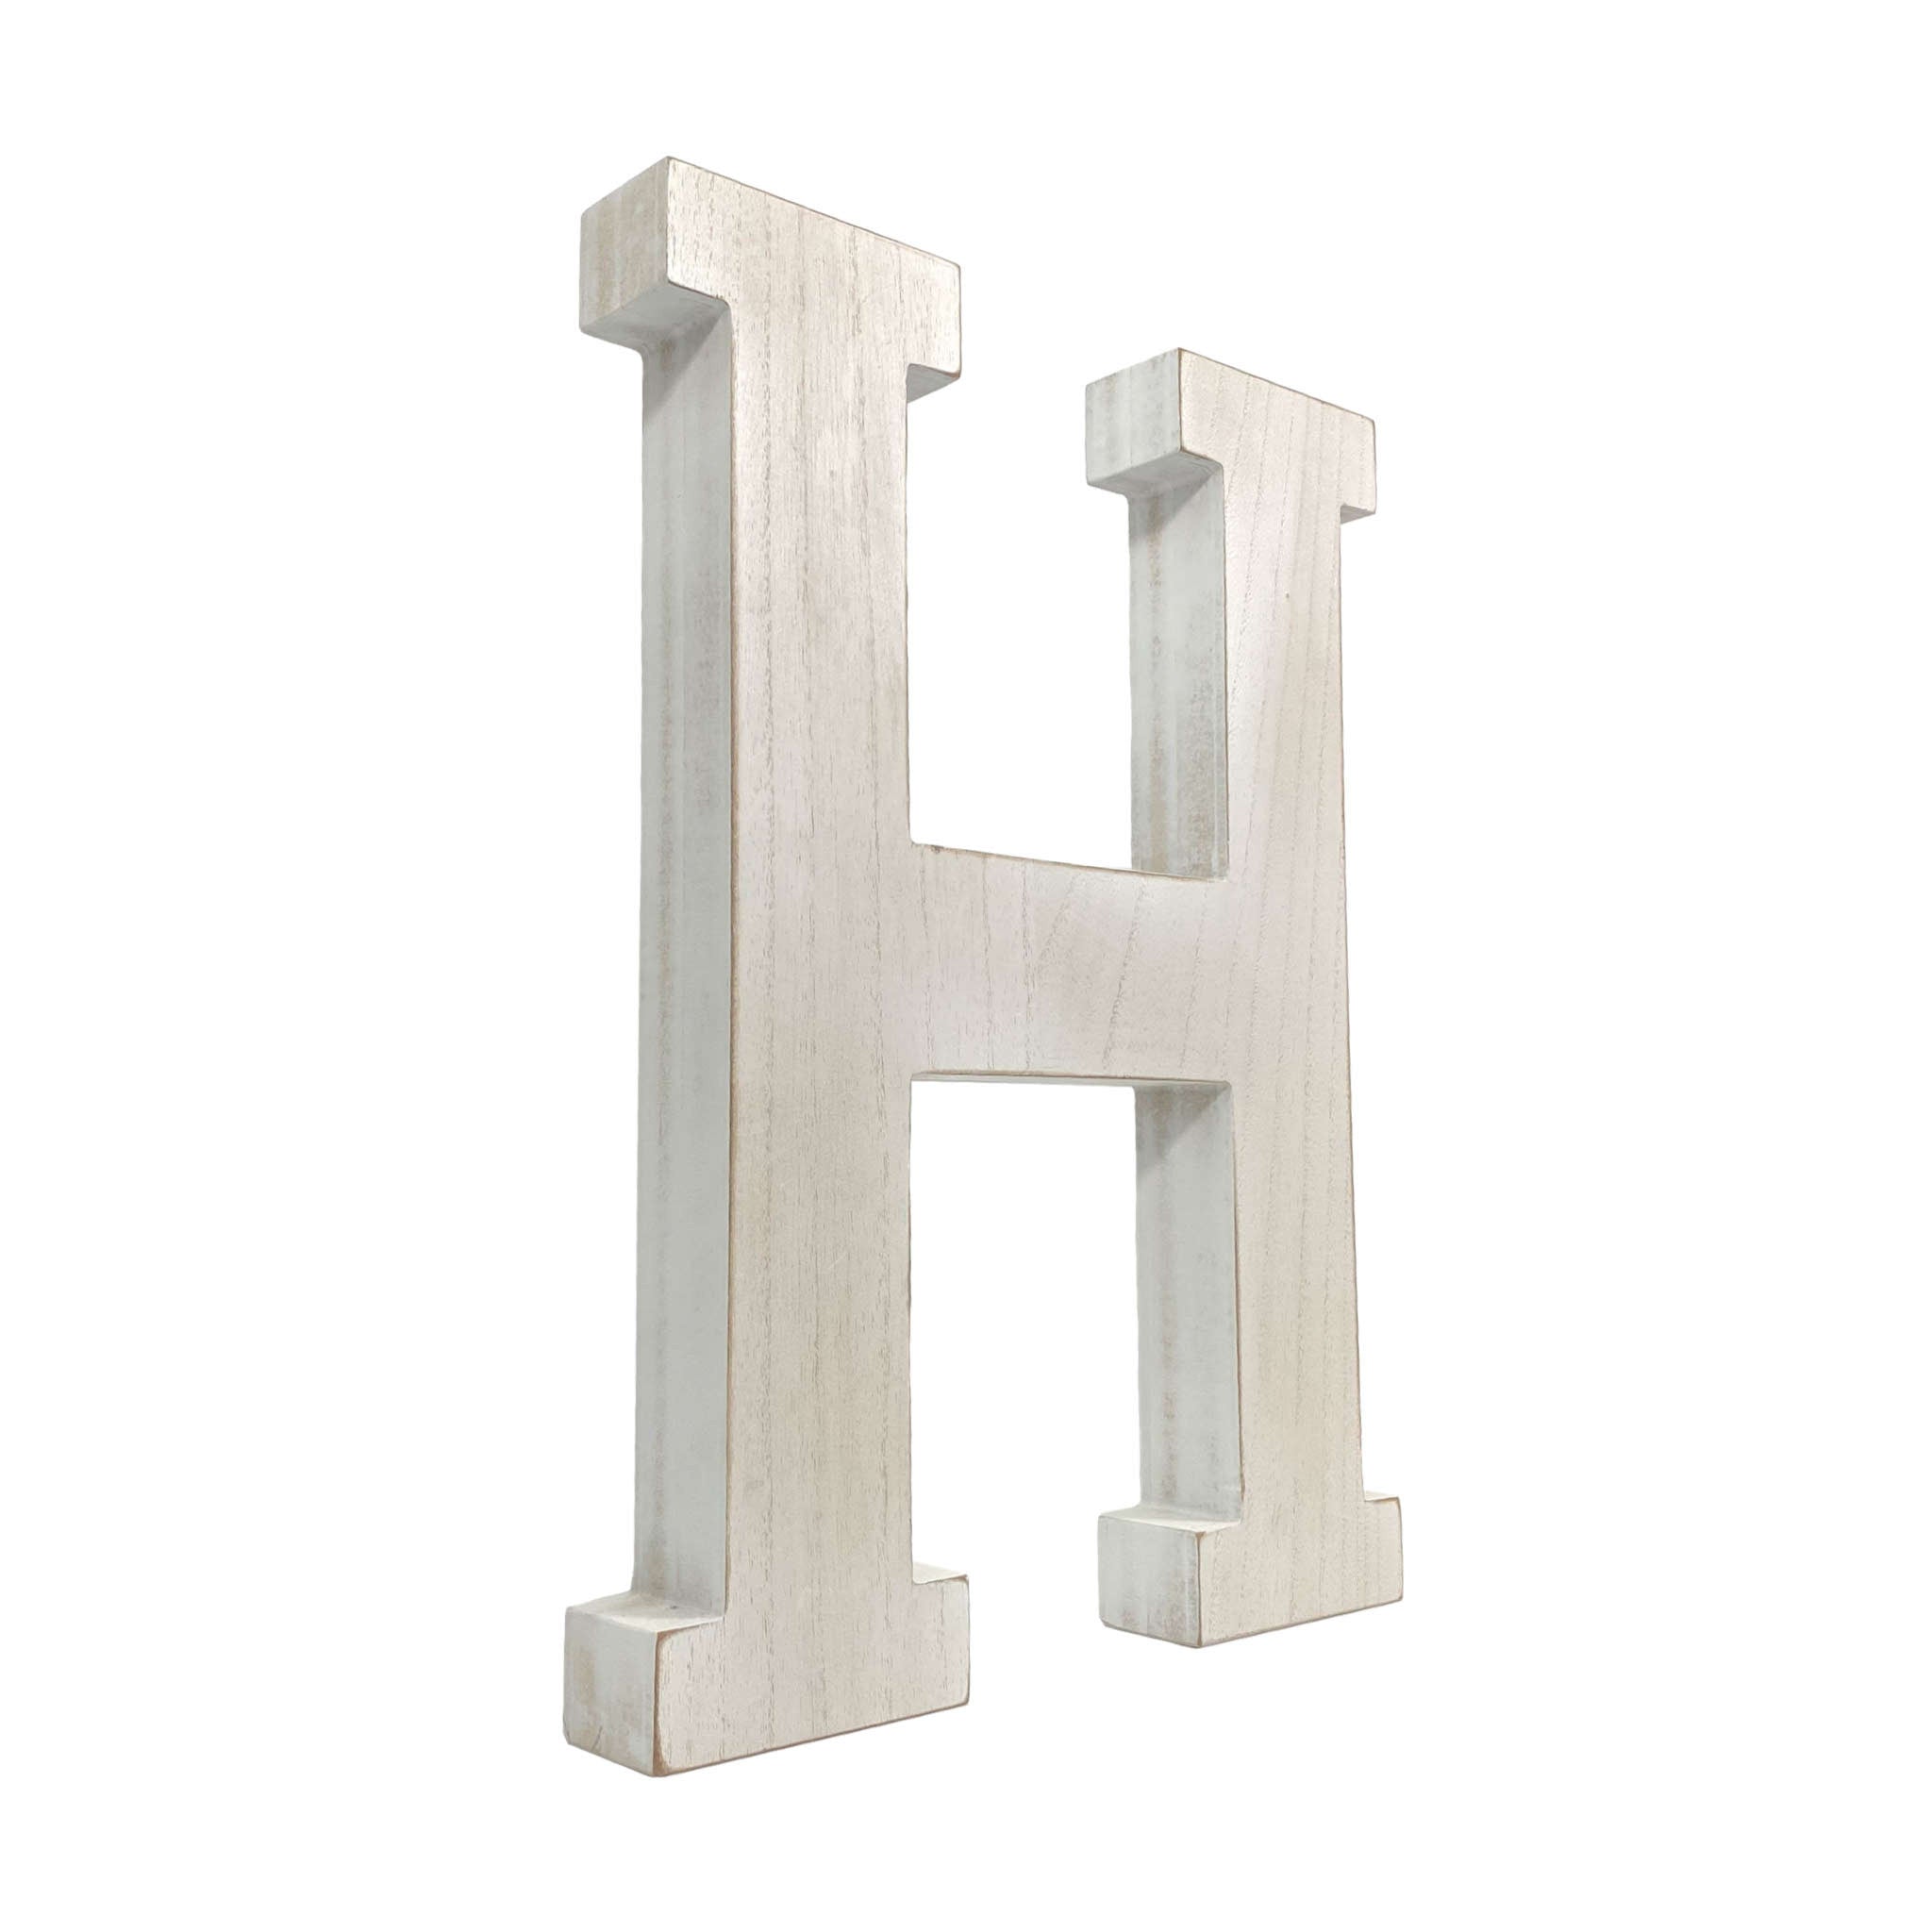 16" Distressed White Wash Wooden Initial Letter H Sculpture